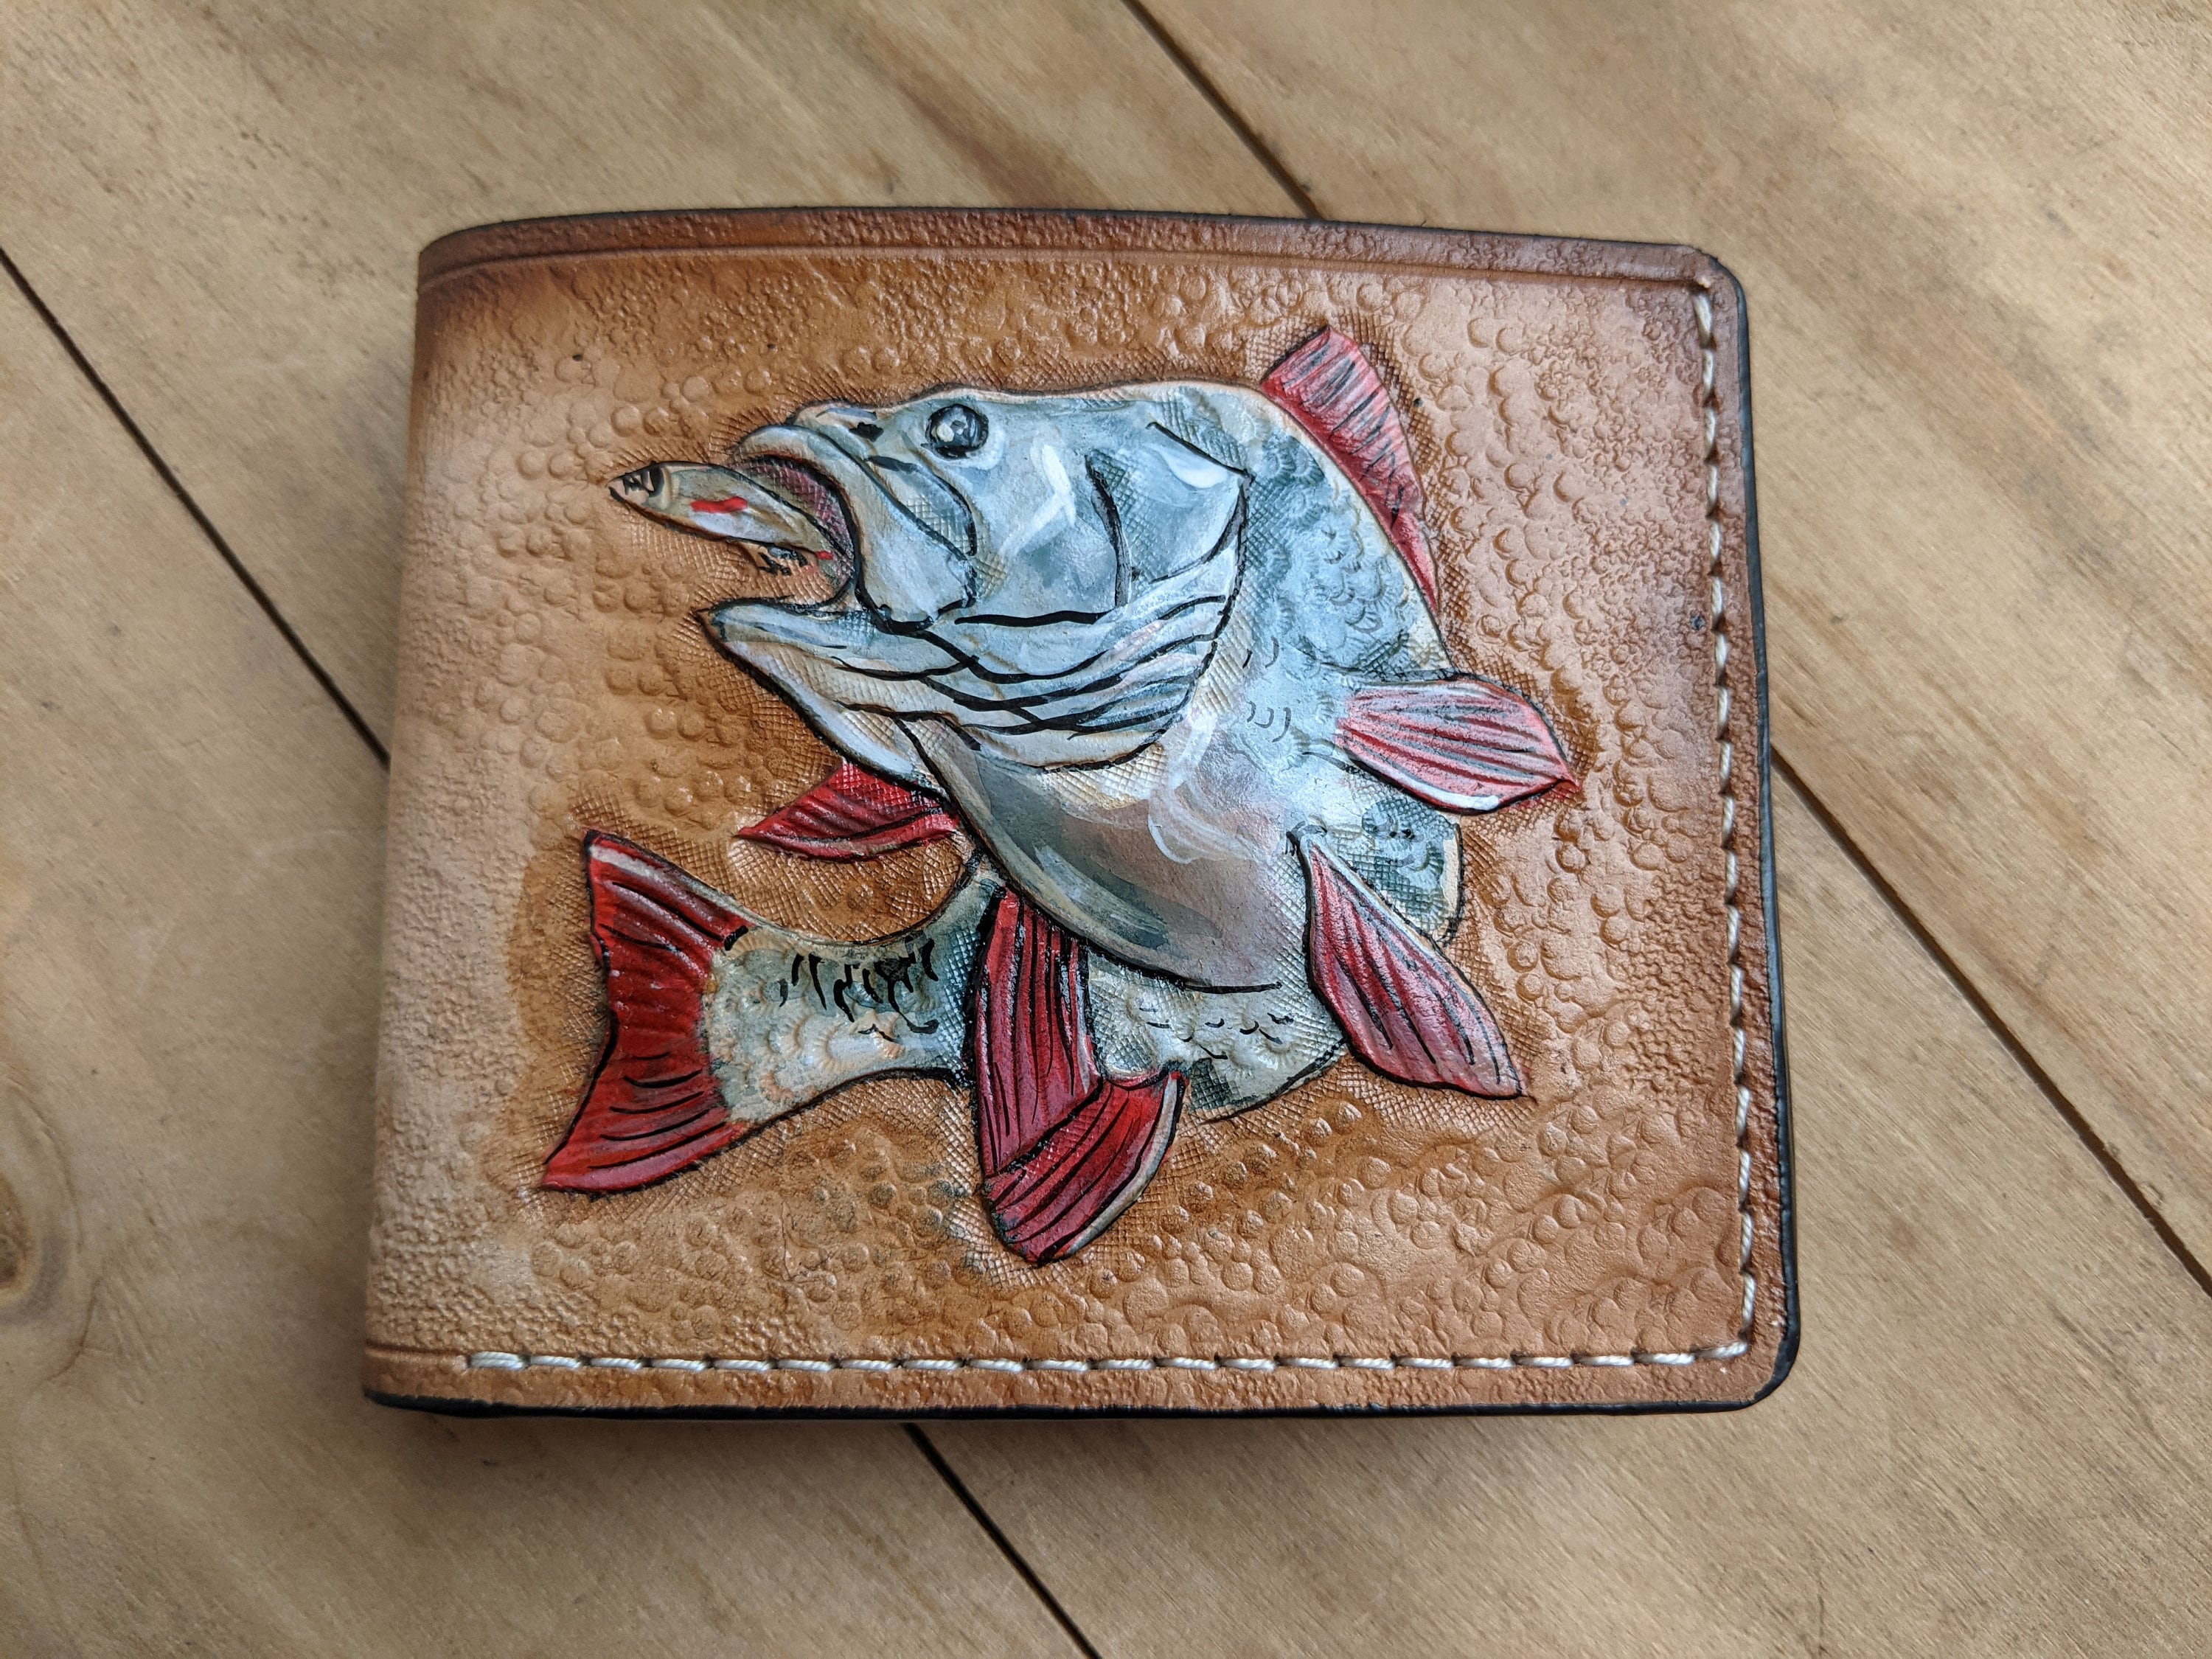 Bass Fish, Fisherman, Angling, Fish, Men's 3D Genuine Leather Wallet, Handmade wallet, Carved wallet, Tooled wallet, Airbrush Art, A(31)